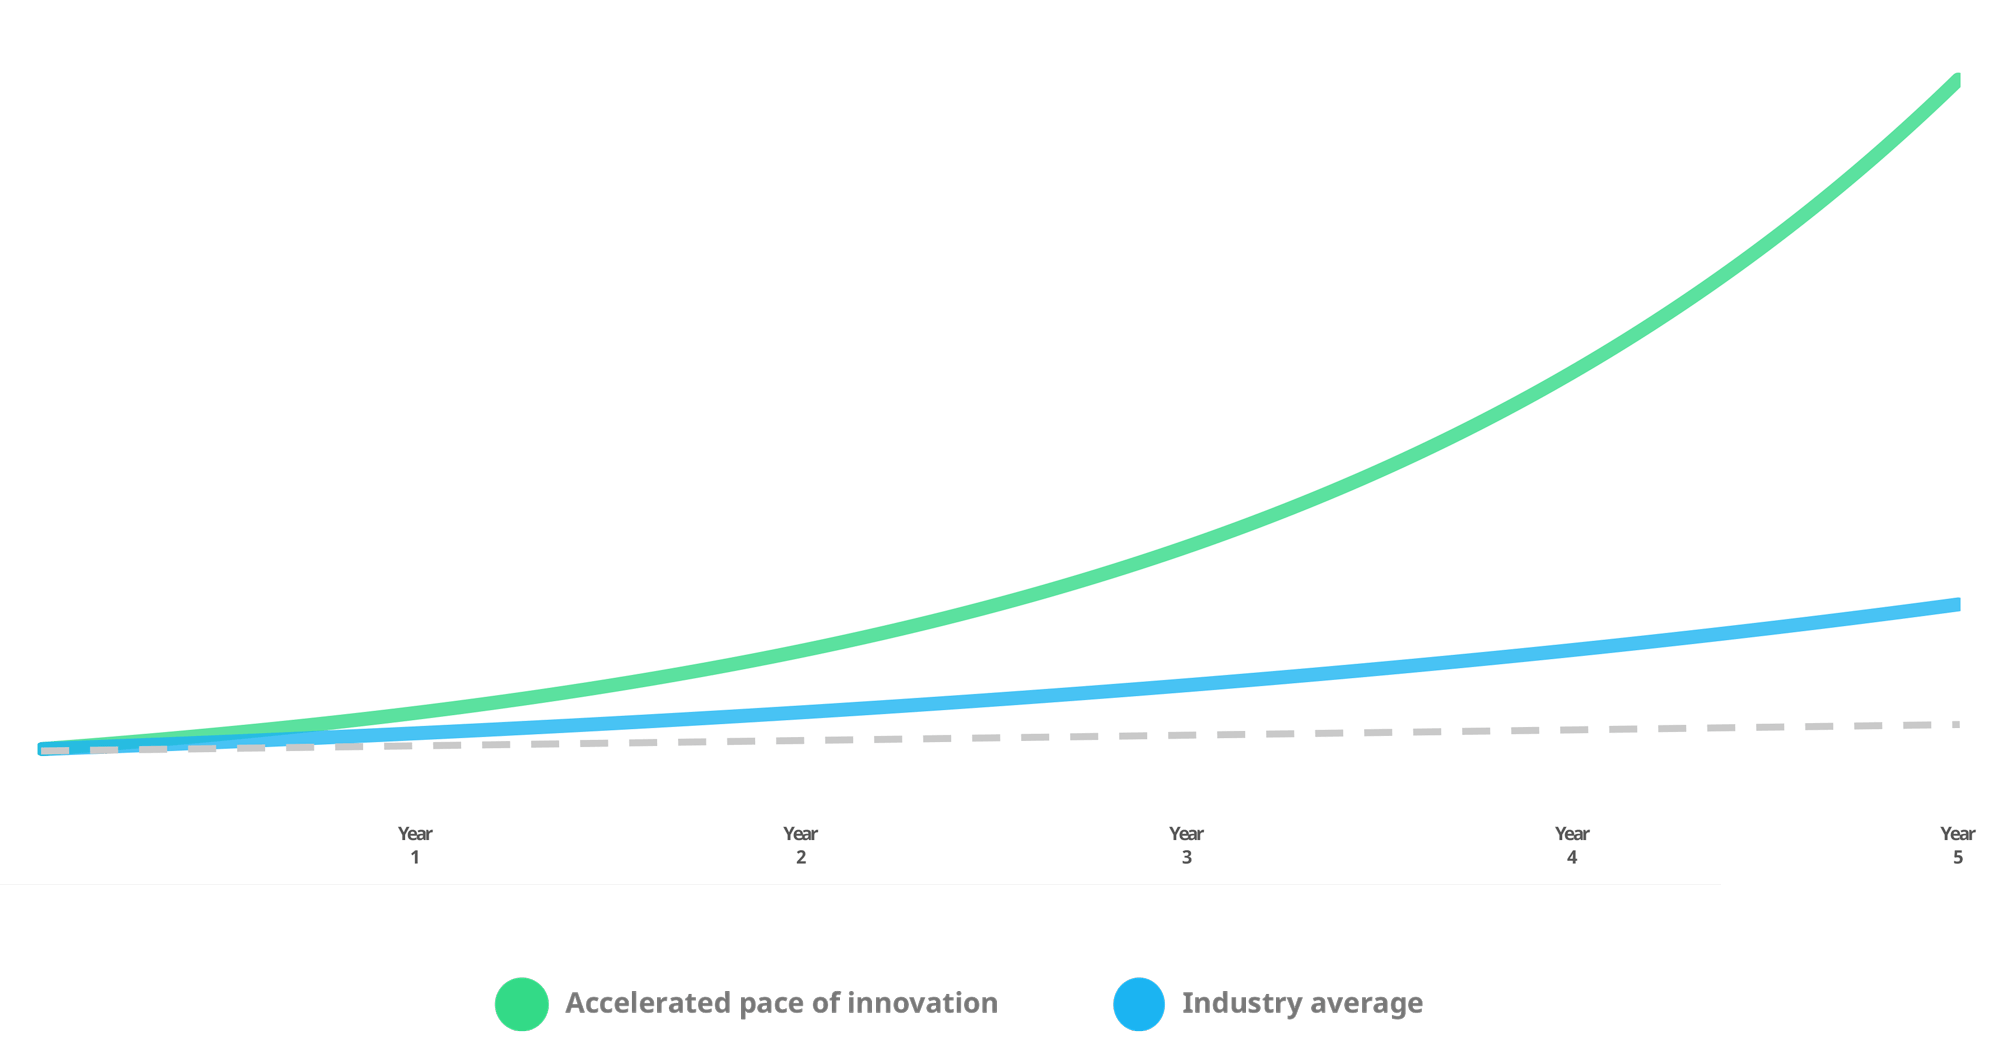 Compounding returns of an accelerated pace of innovation